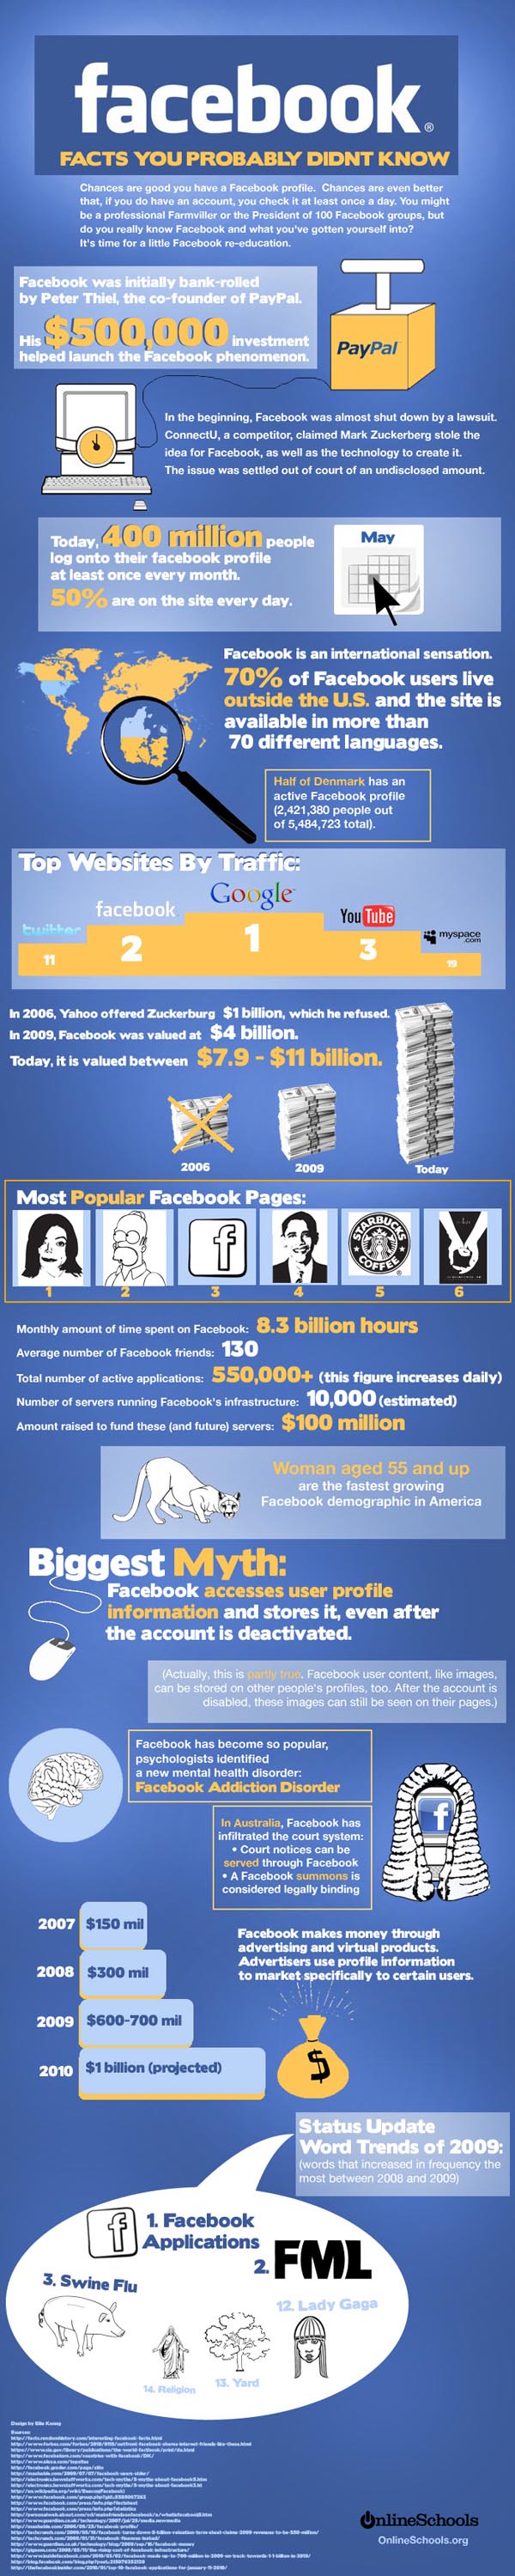 Facebook facts you probably didn't know.